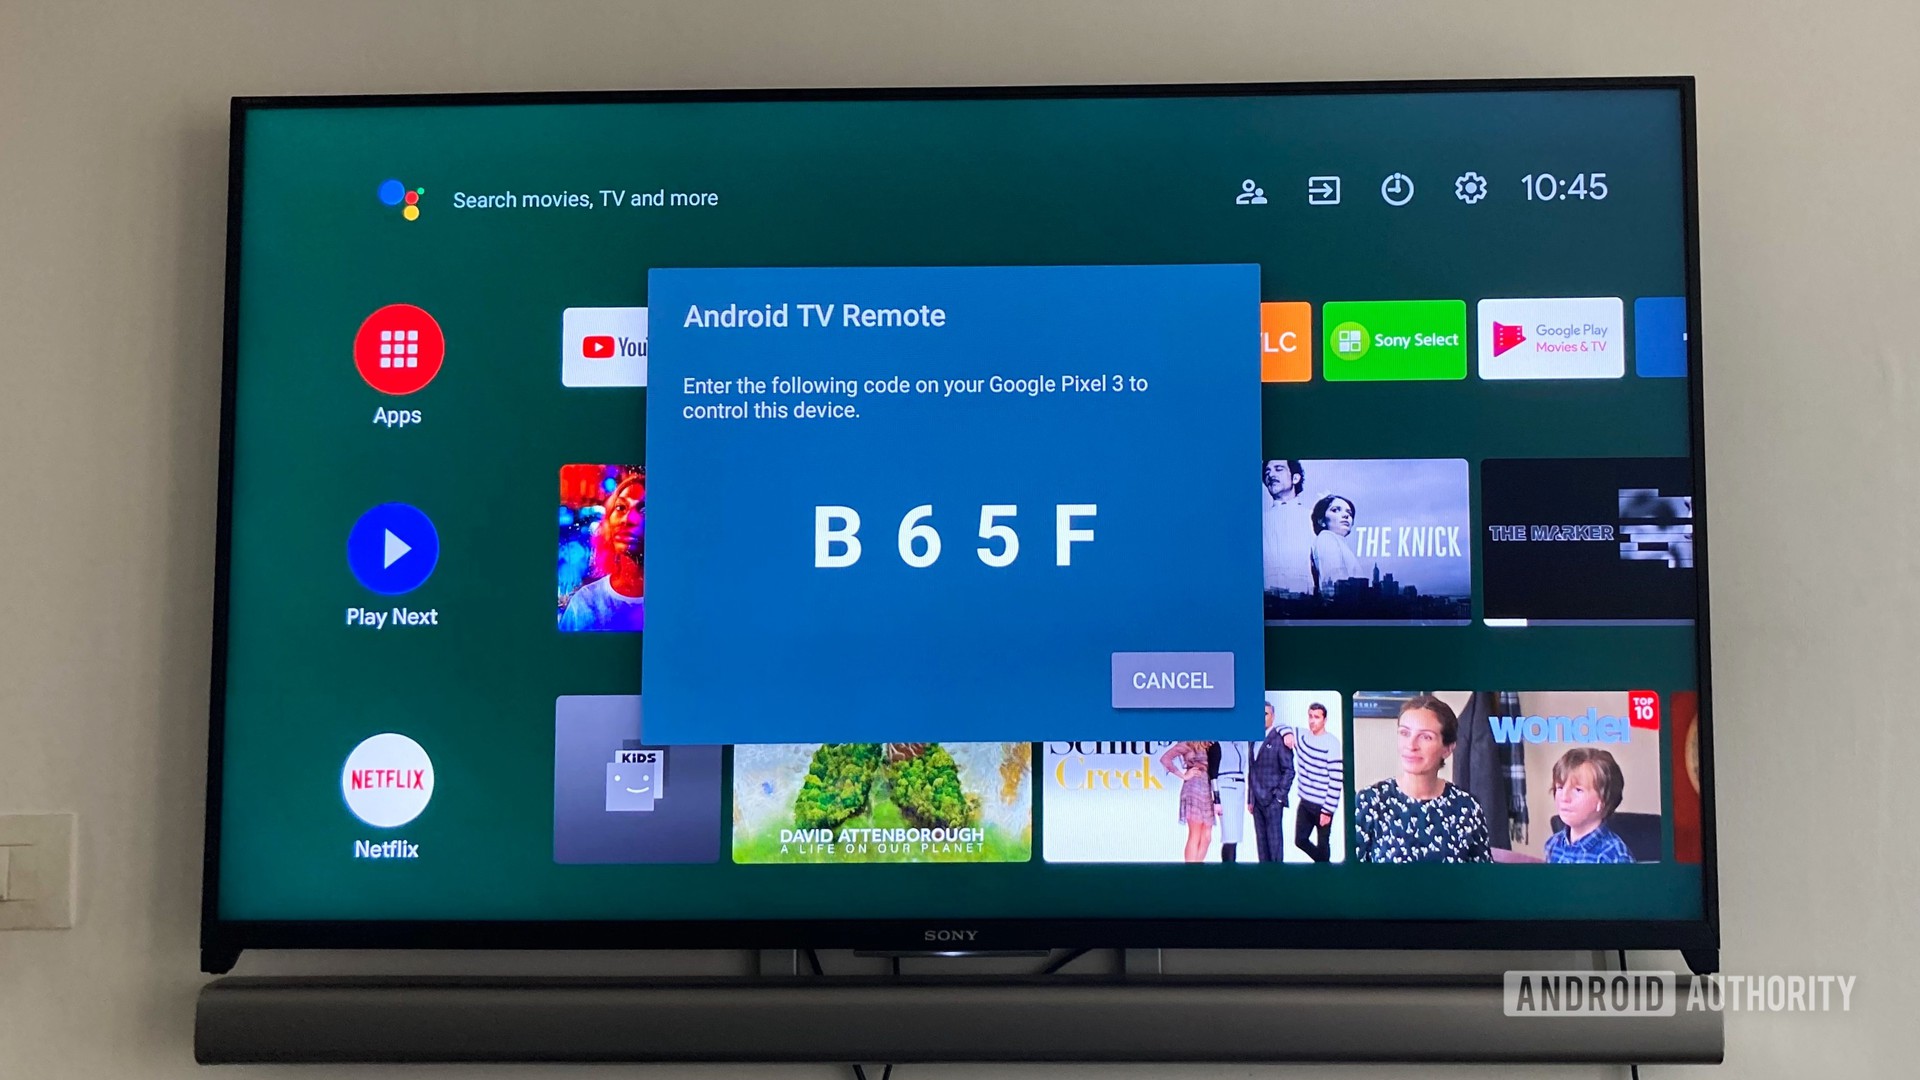 Android TV Remote Control app connection with Android TV